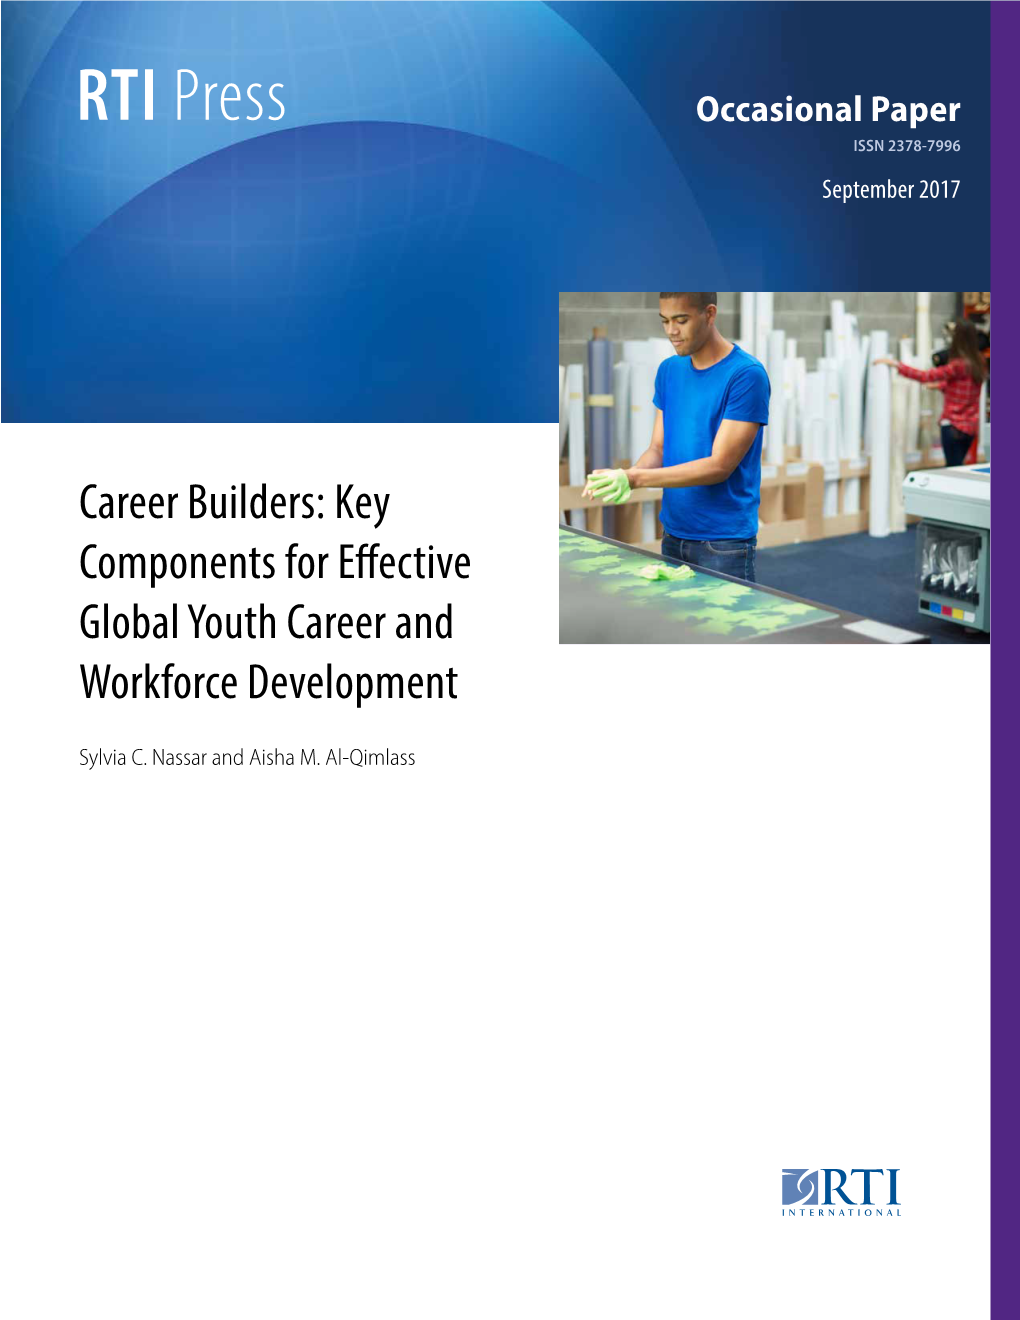 Key Components for Effective Global Career and Workforce Development